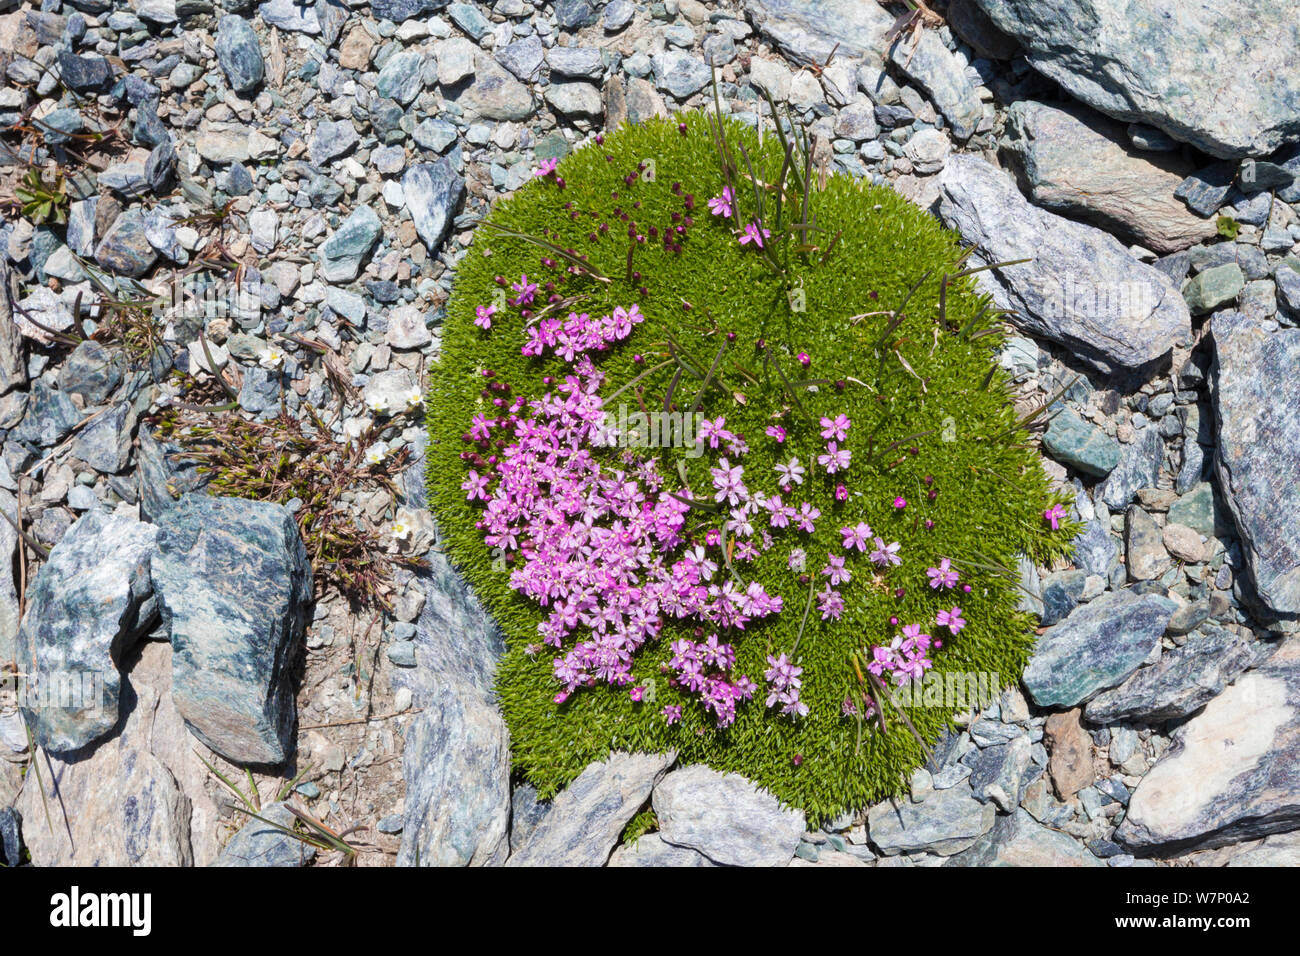 Moss Campion (Silene acaulis) growing on scree slope at 2800m altitude, Aosta Valley, Monte Rosa Massif, Pennine Alps, Italy. July. Stock Photo